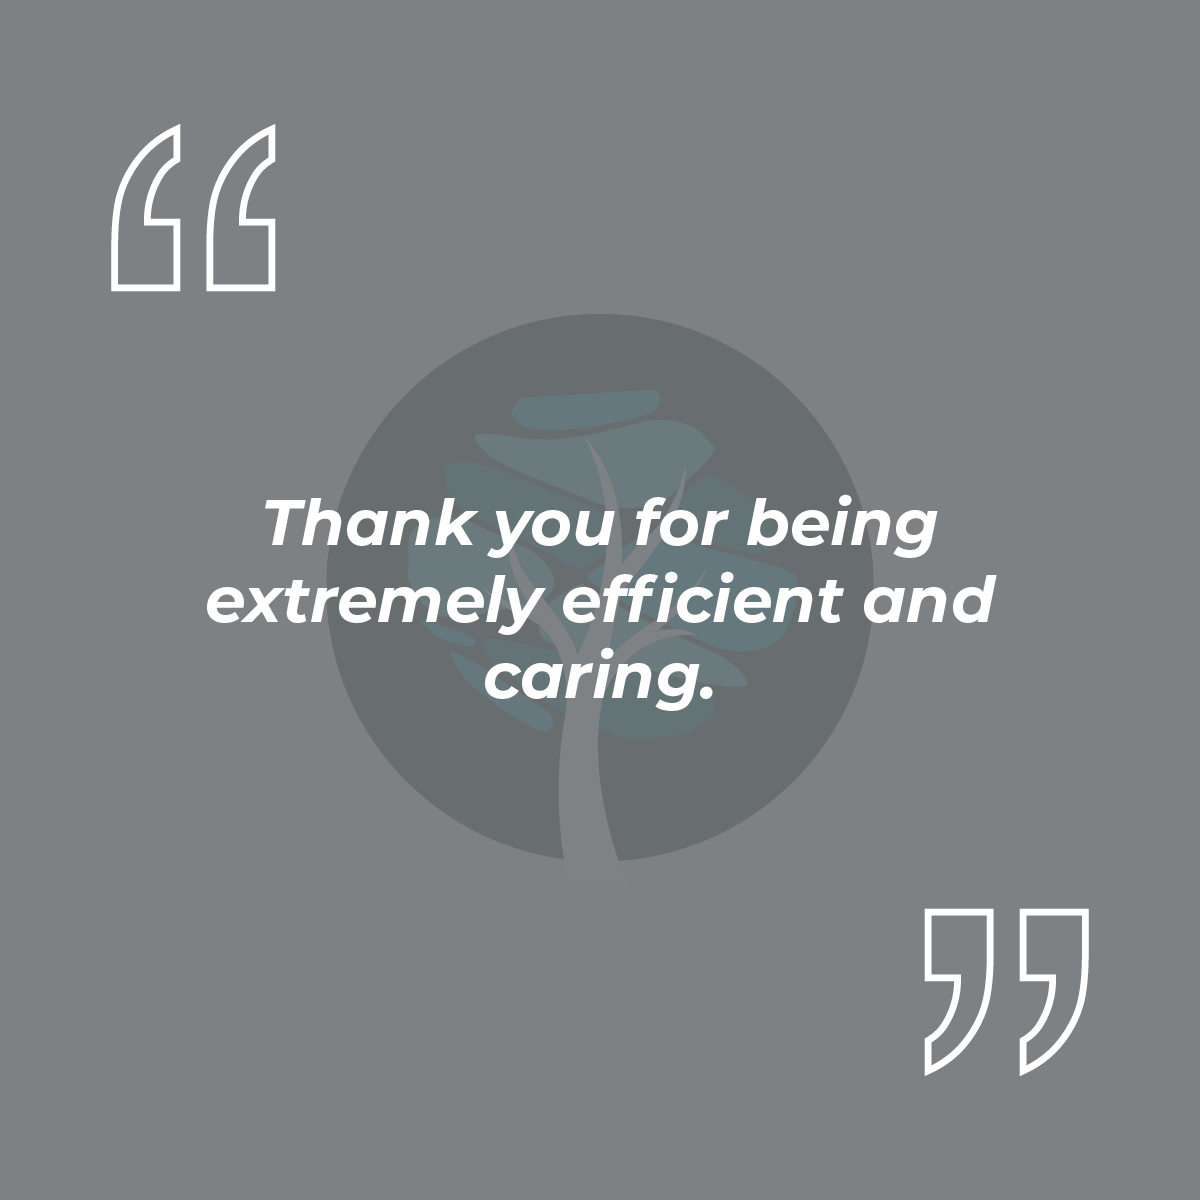 Thank you for being extremely efficient and caring.